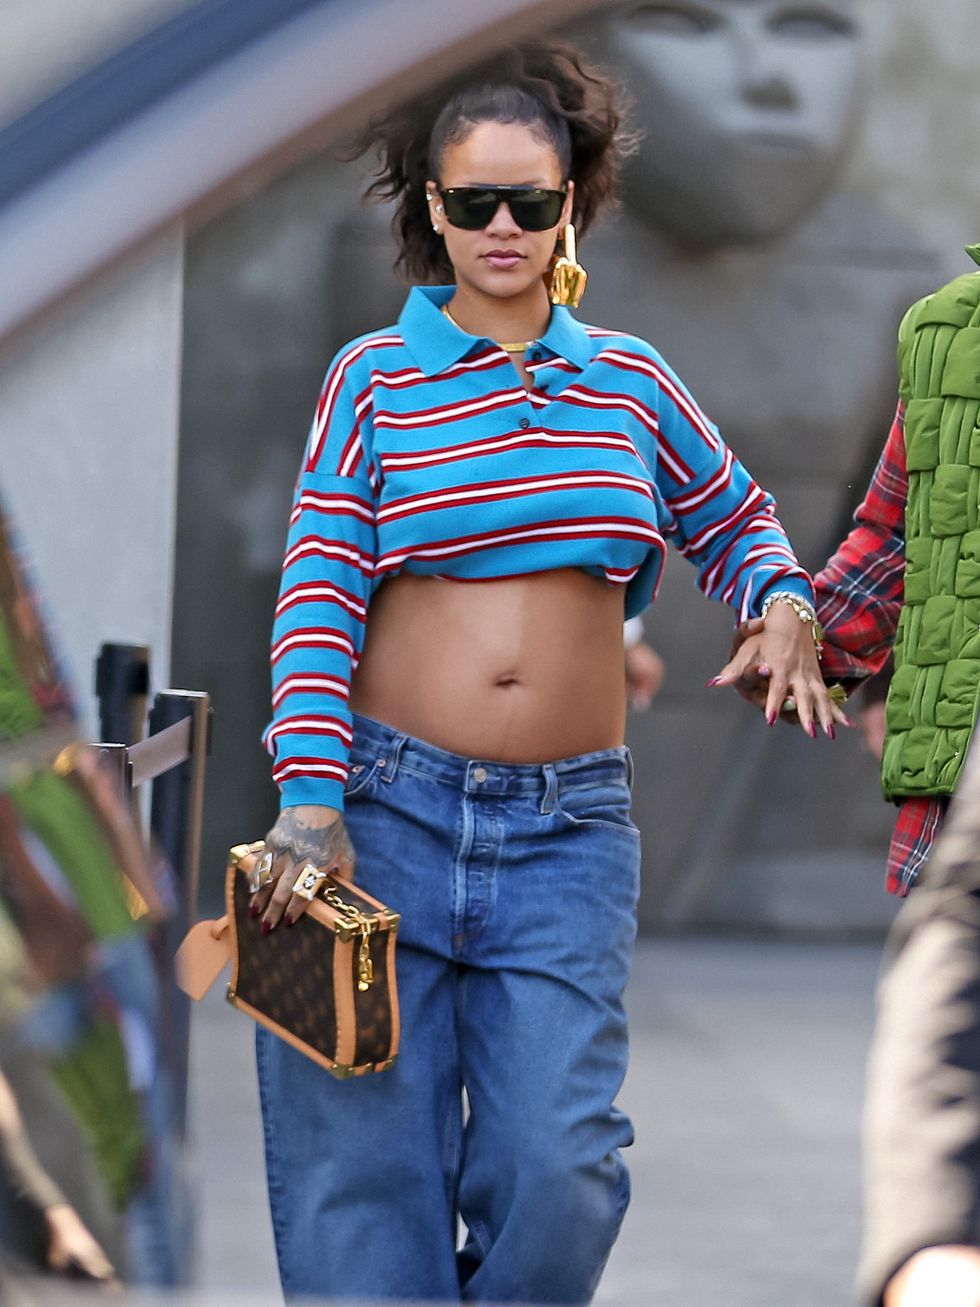 Rihanna Shows Off Baby Bump in Crop Top and LowRise Jeans on Day Date